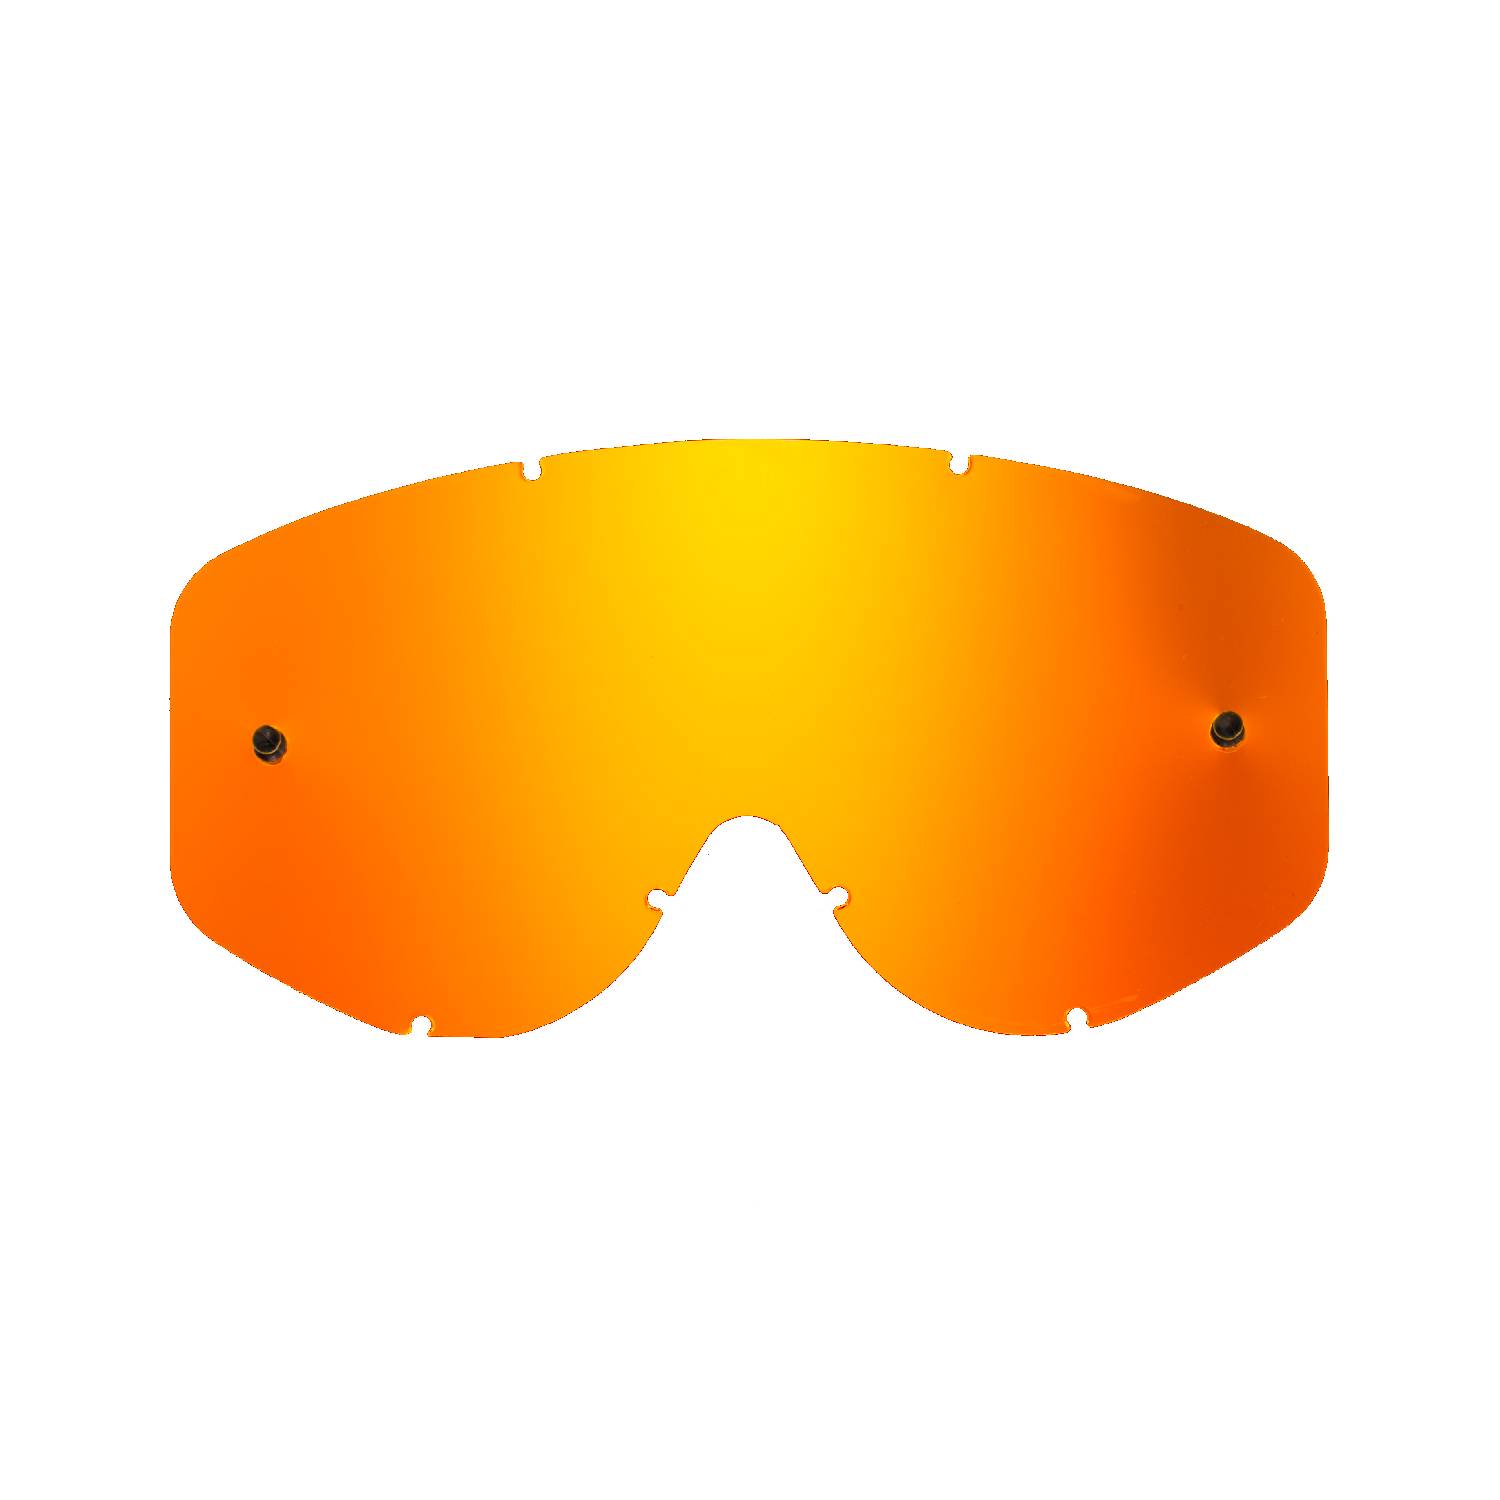 orange-toned mirrored replacement lenses for goggles compatible for Scott 83/89 / Recoil / 89 Xi goggle